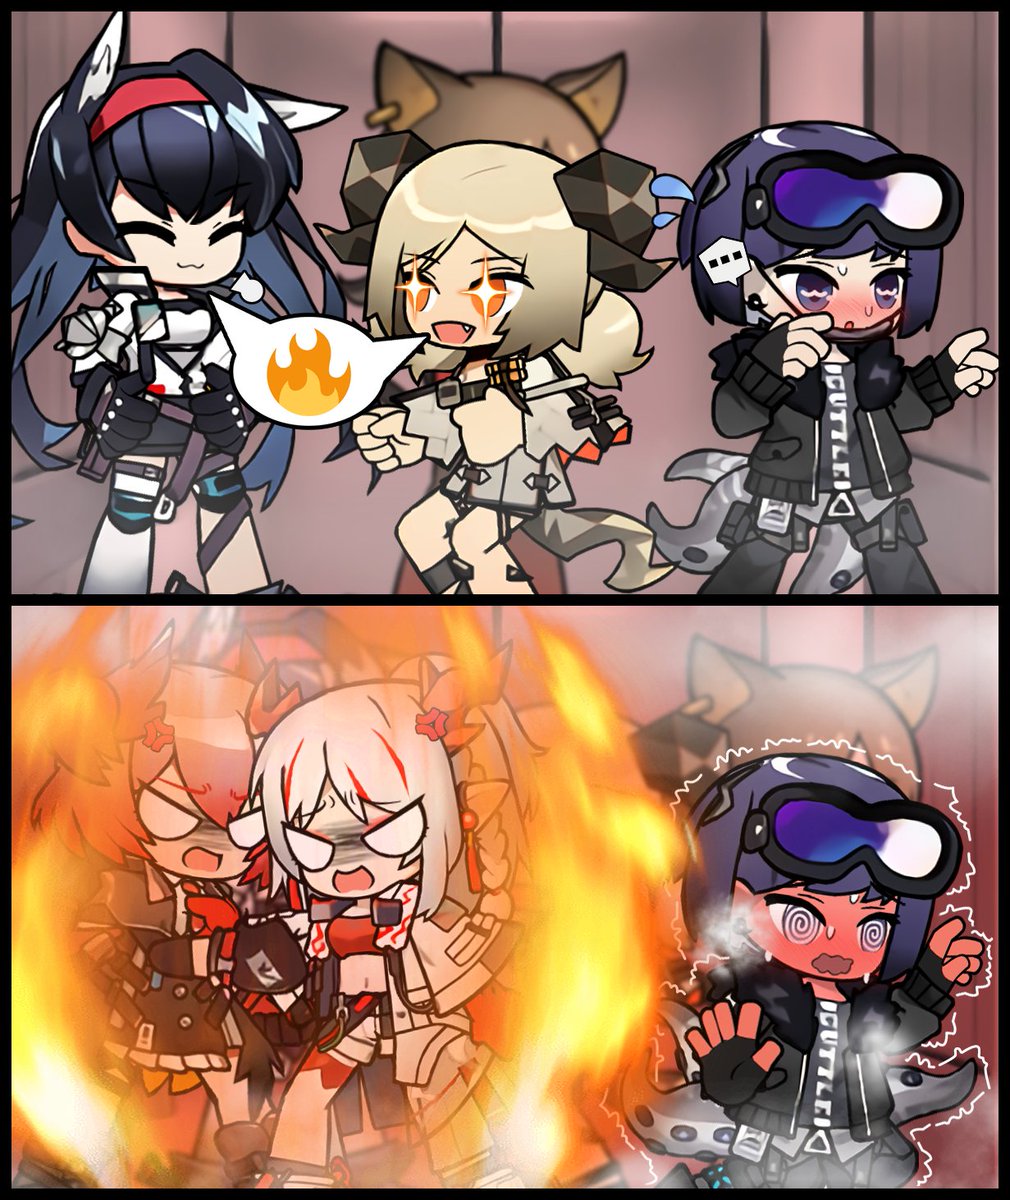 Cooked Cuttlefish
🔥🦑🔥

#Arknights #明日方舟 #アークナイツ #명일방주 